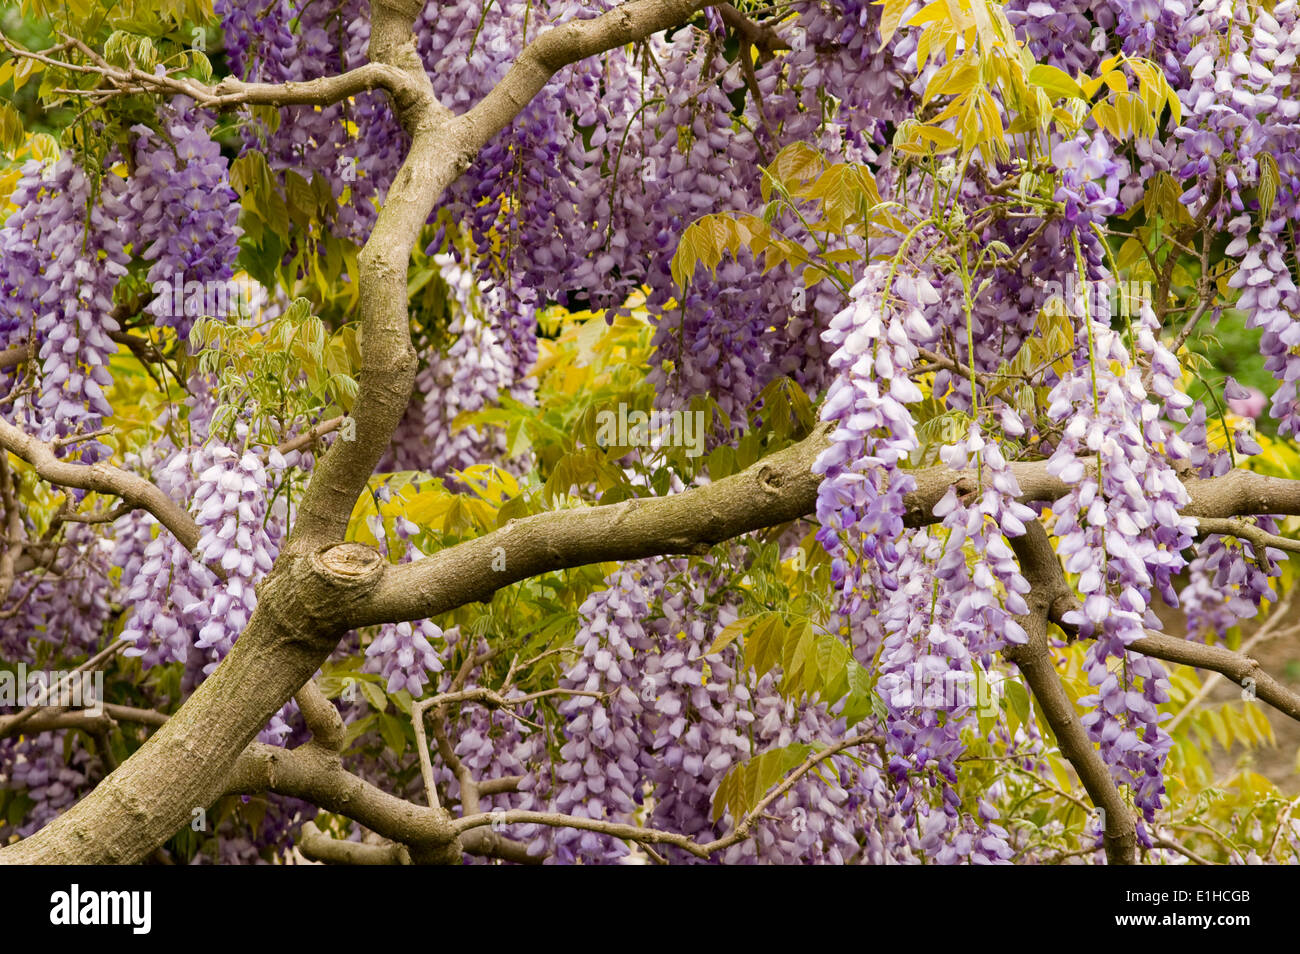 Wisteria blossoms in bloom and hanging from the tree and vine branches Stock Photo